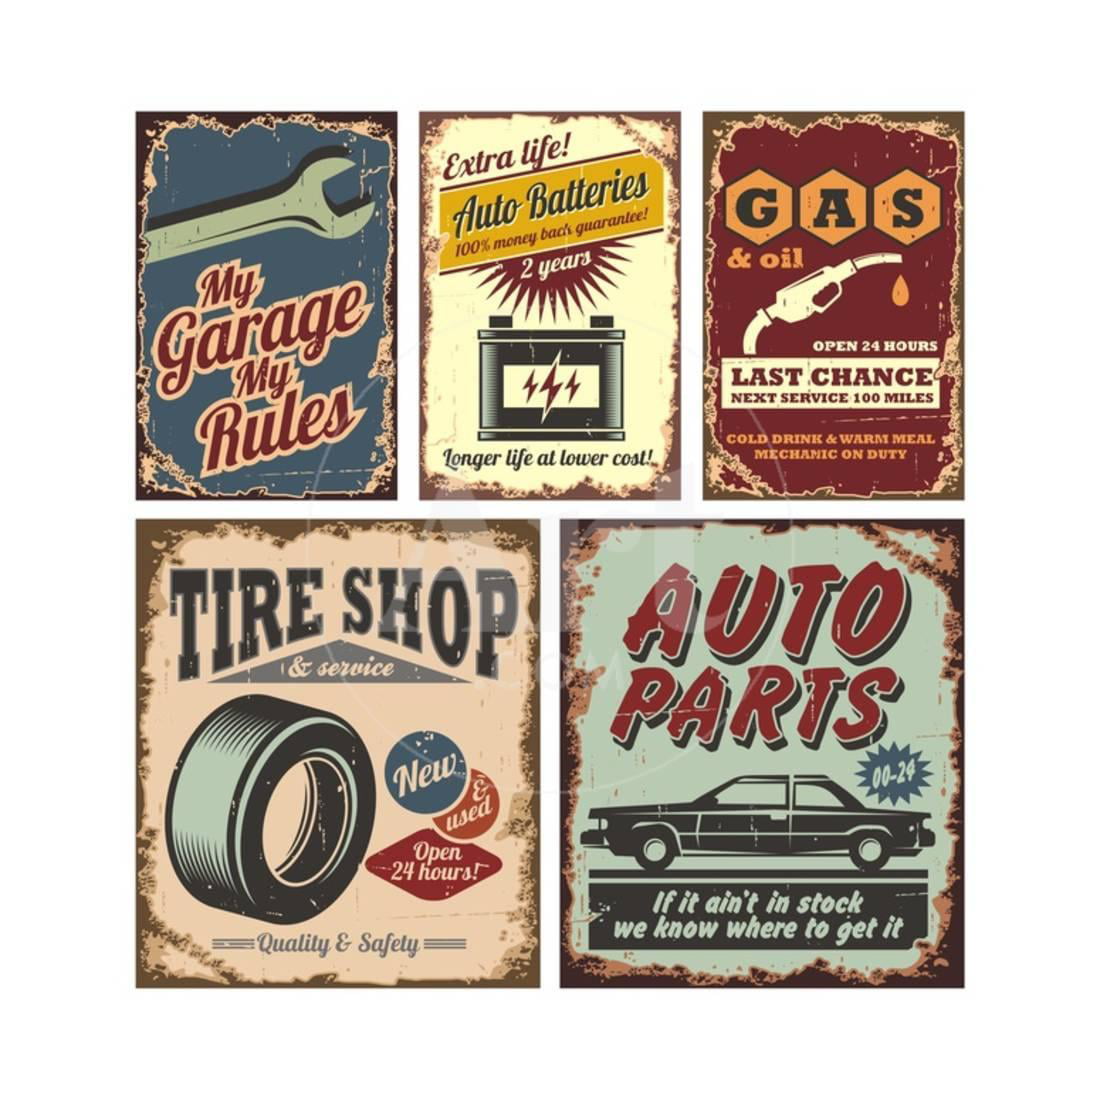 Sign Canvas WALL ART Childhood Cars Bat-Mobile,Metal poster Plaque poster 